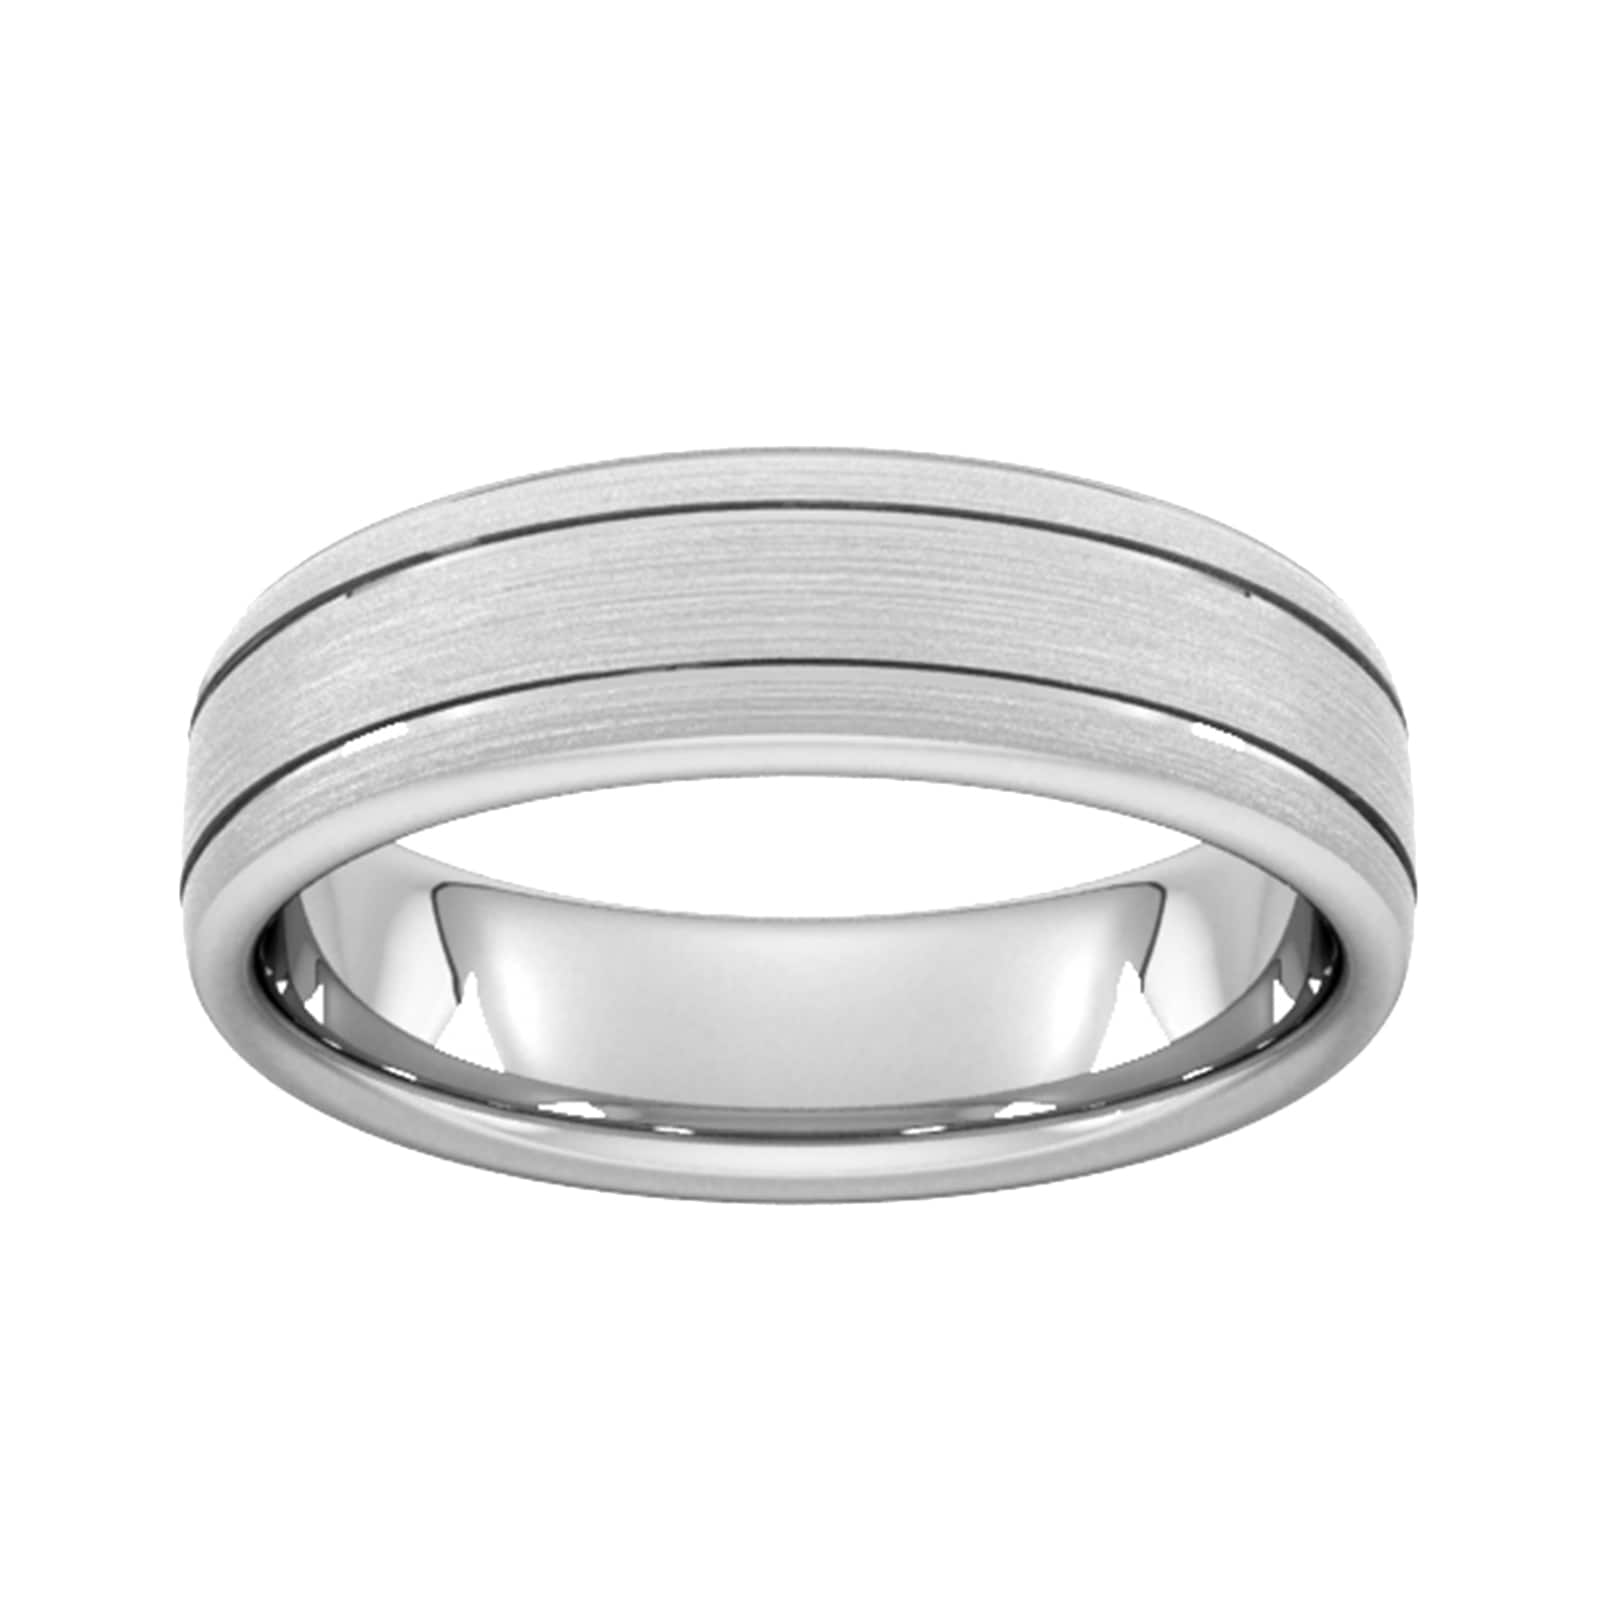 6mm Traditional Court Heavy Matt Finish With Double Grooves Wedding Ring In 950 Palladium - Ring Size W